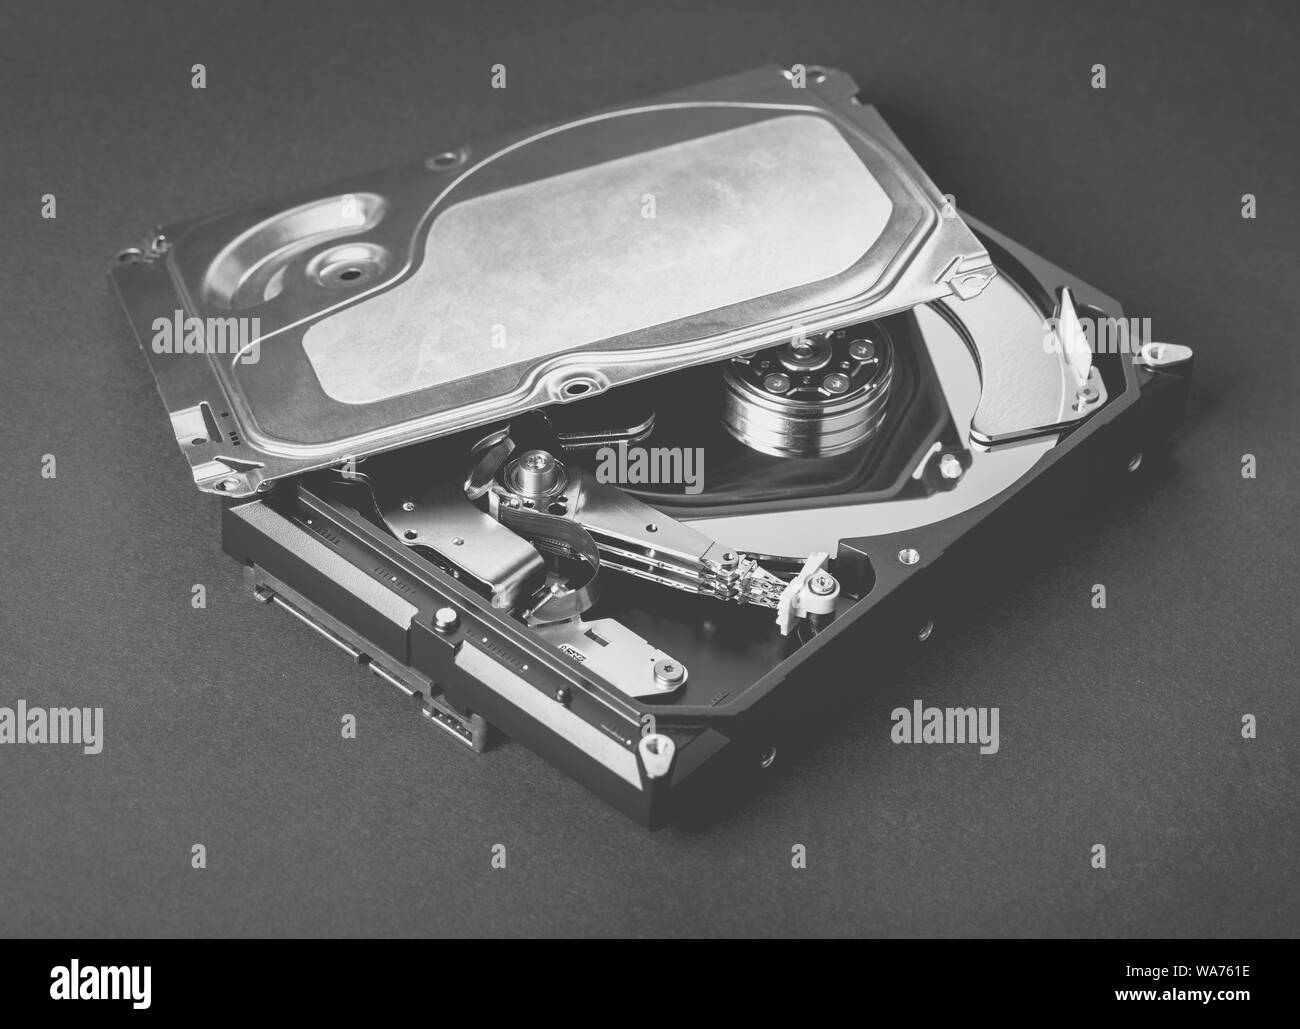 disassembled computer hard drive on black background Stock Photo